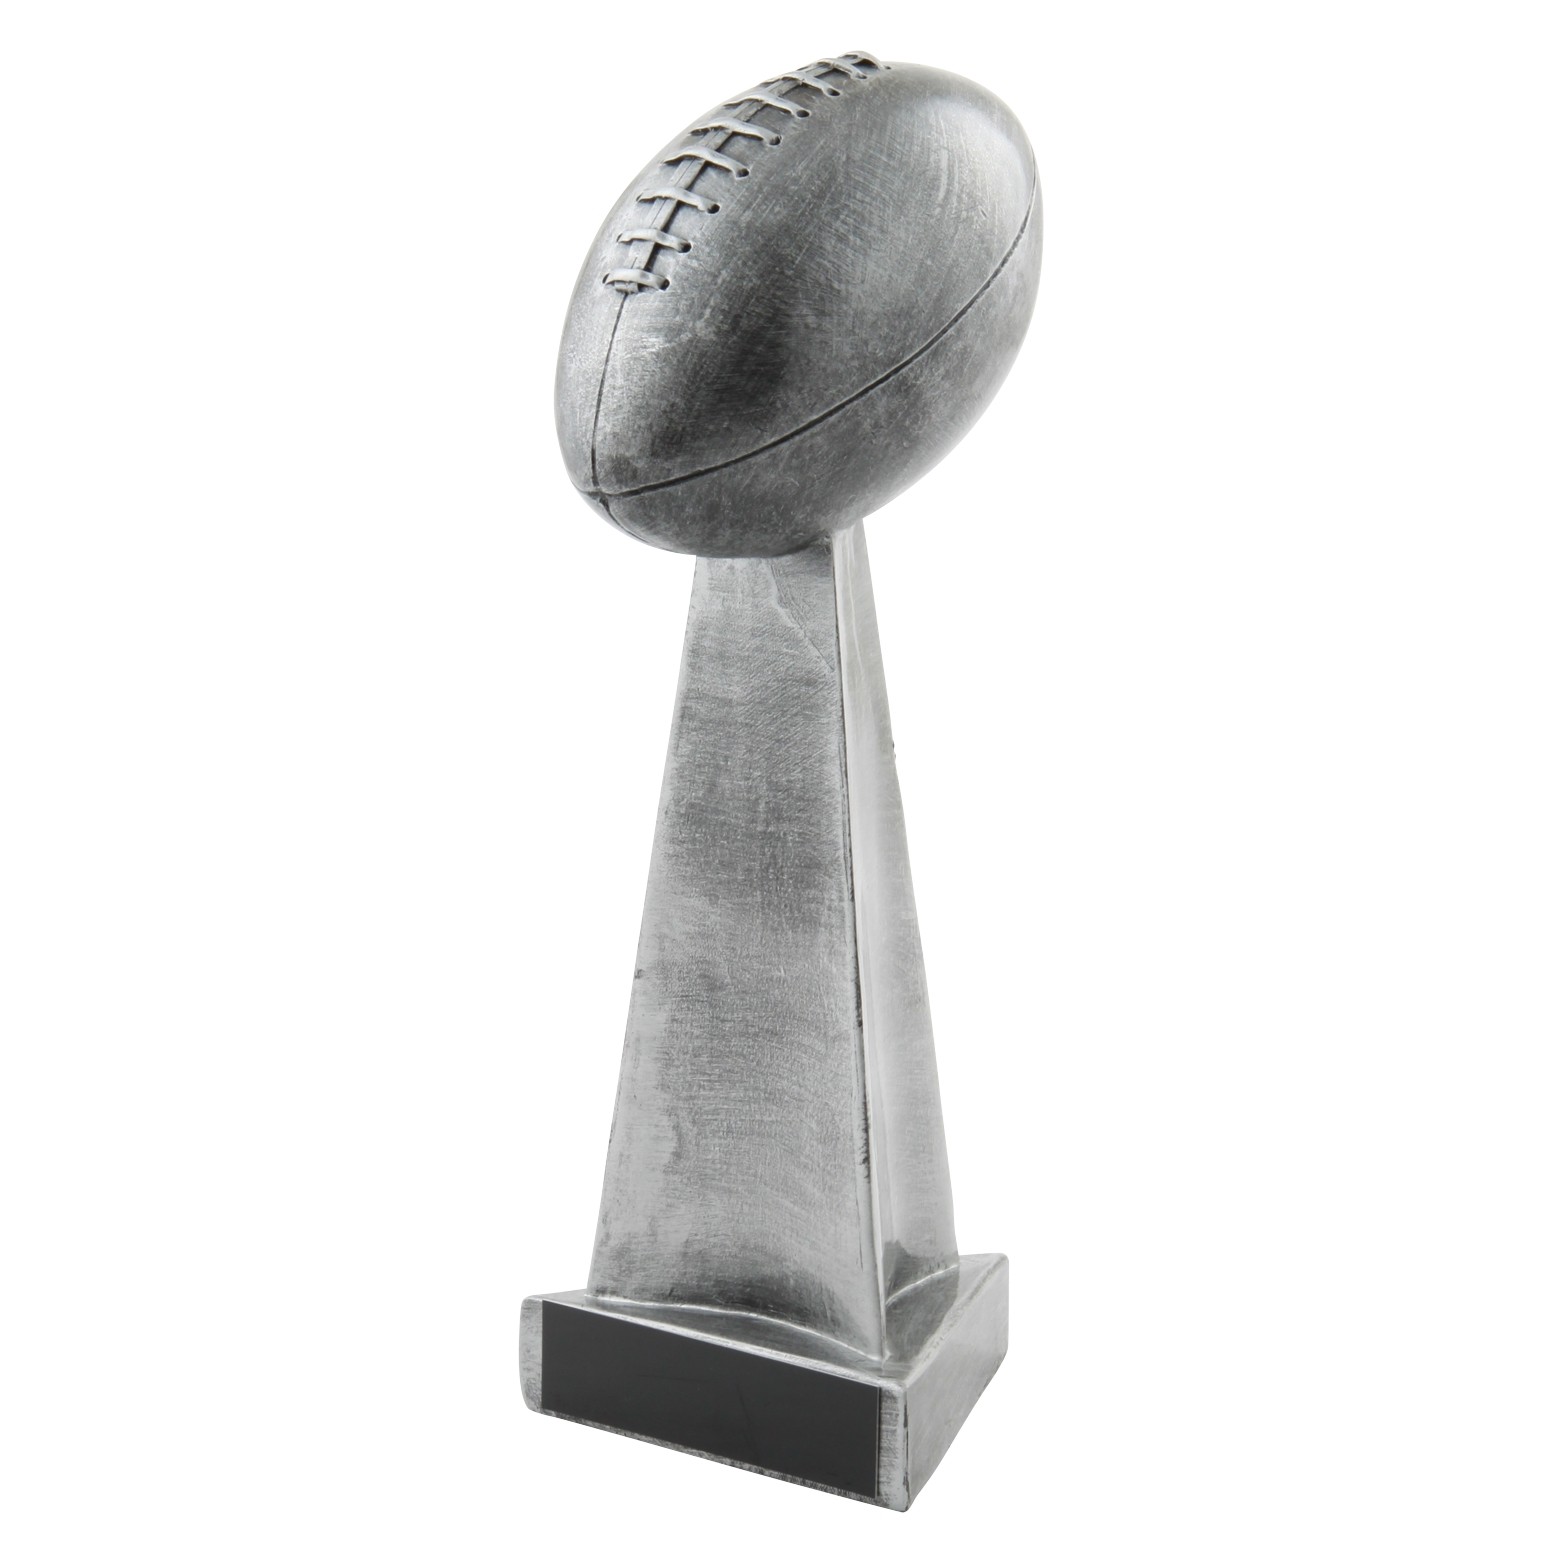 Football Trophies Resin Jubilation Football Tower Trophy 3 sizes FREE Engraving 